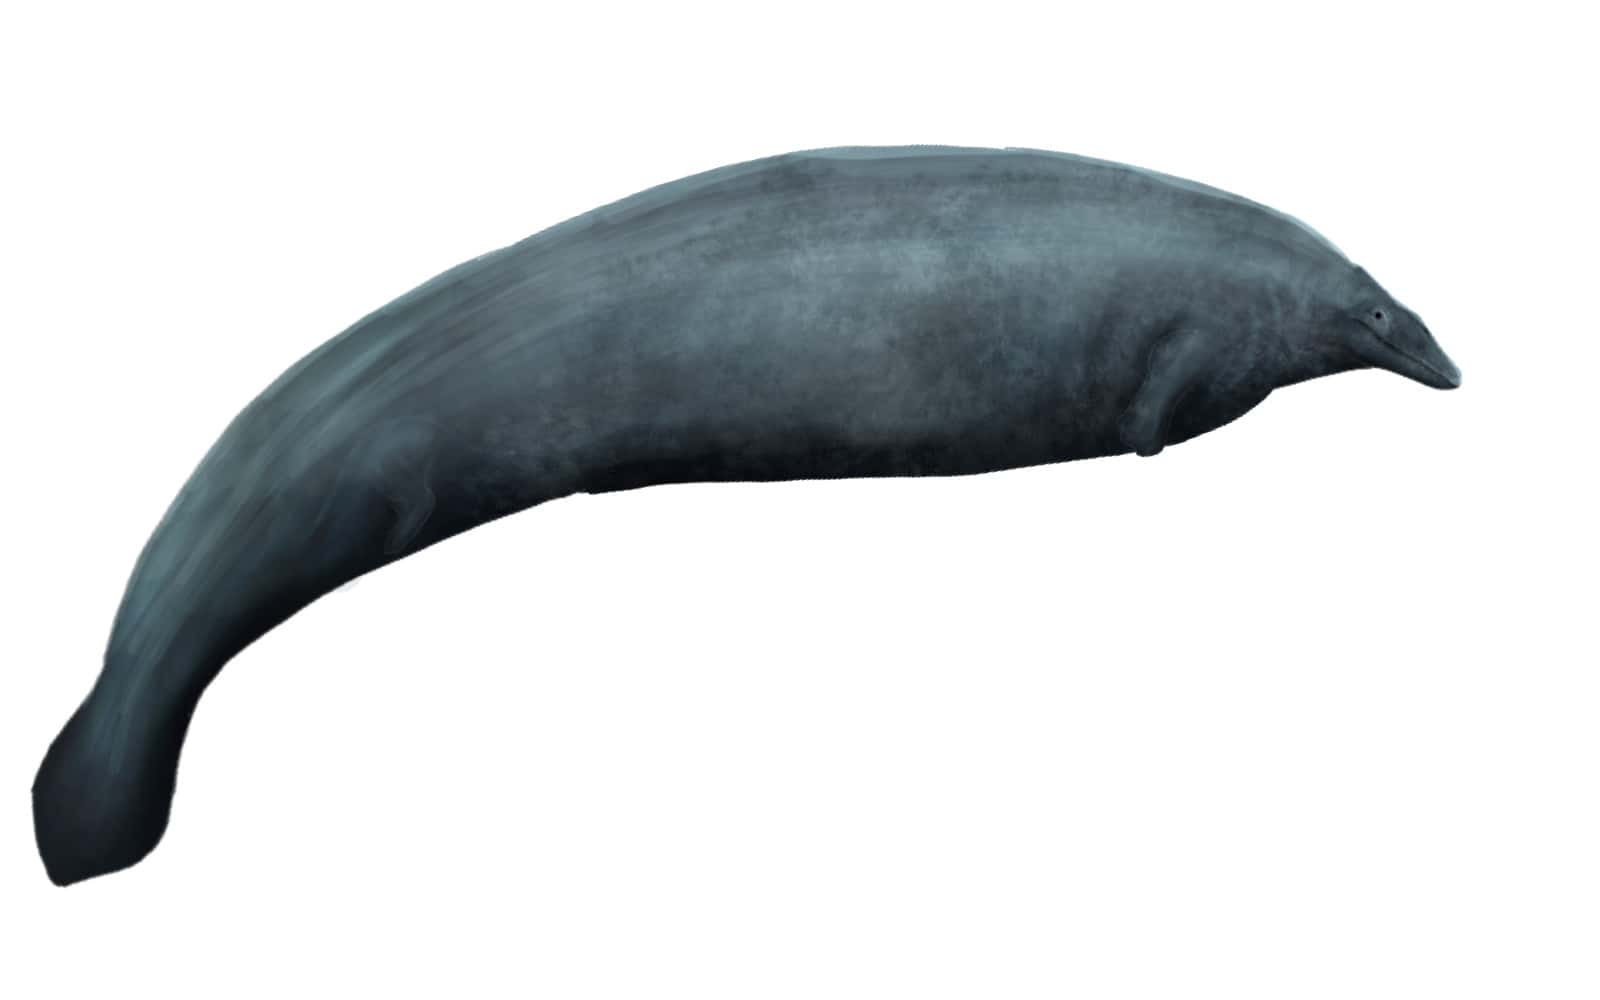 A restoration of P. colossus shows a grey mammal with a large body and small head.